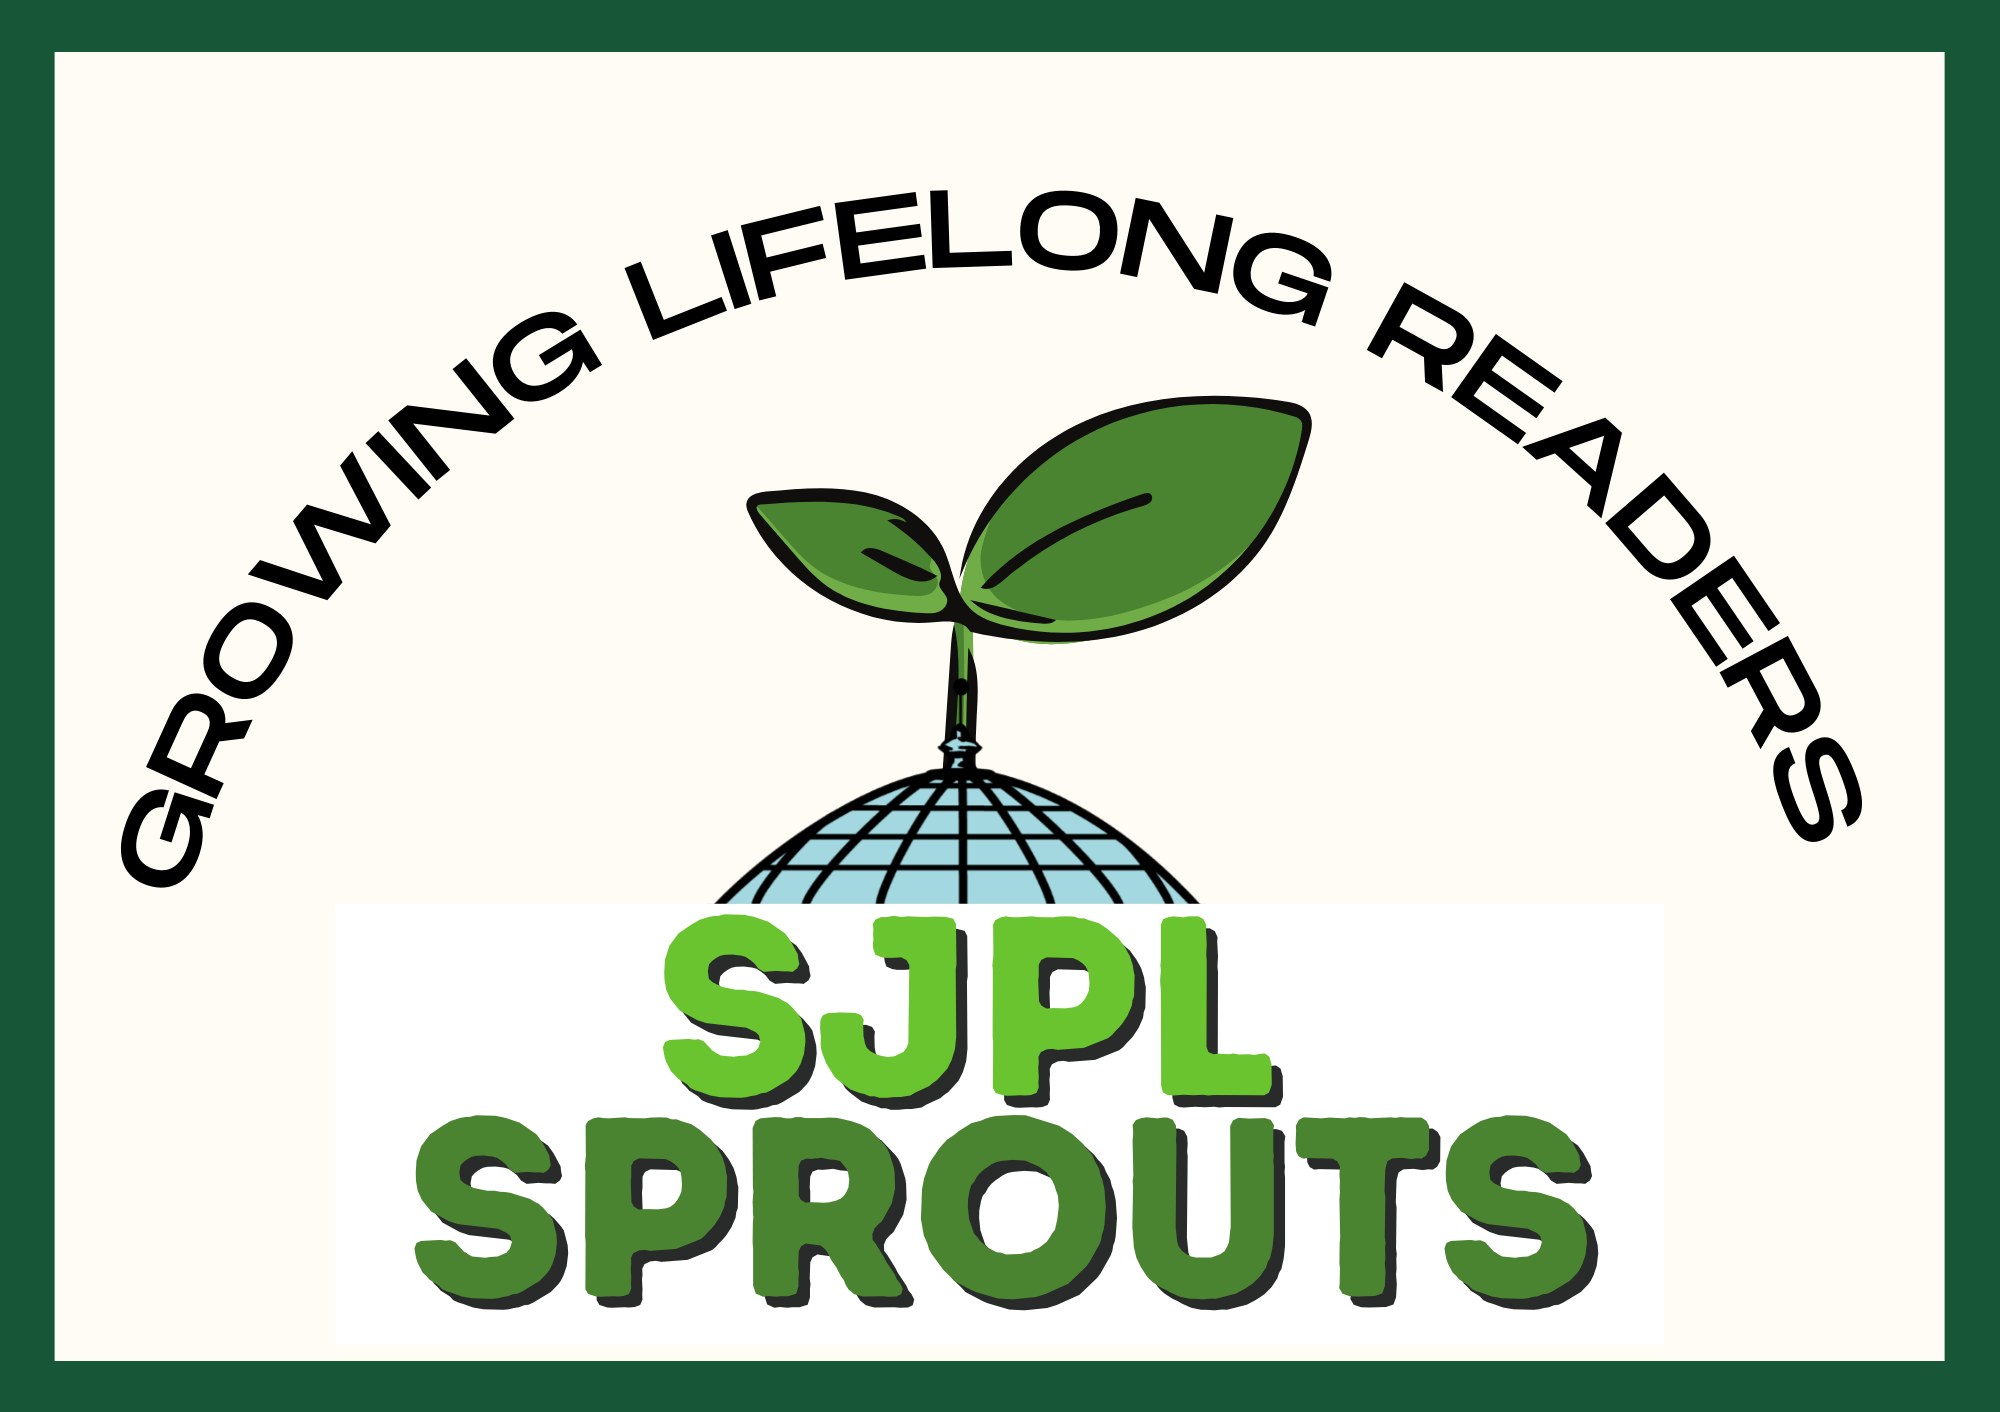 SJPL Sprouts